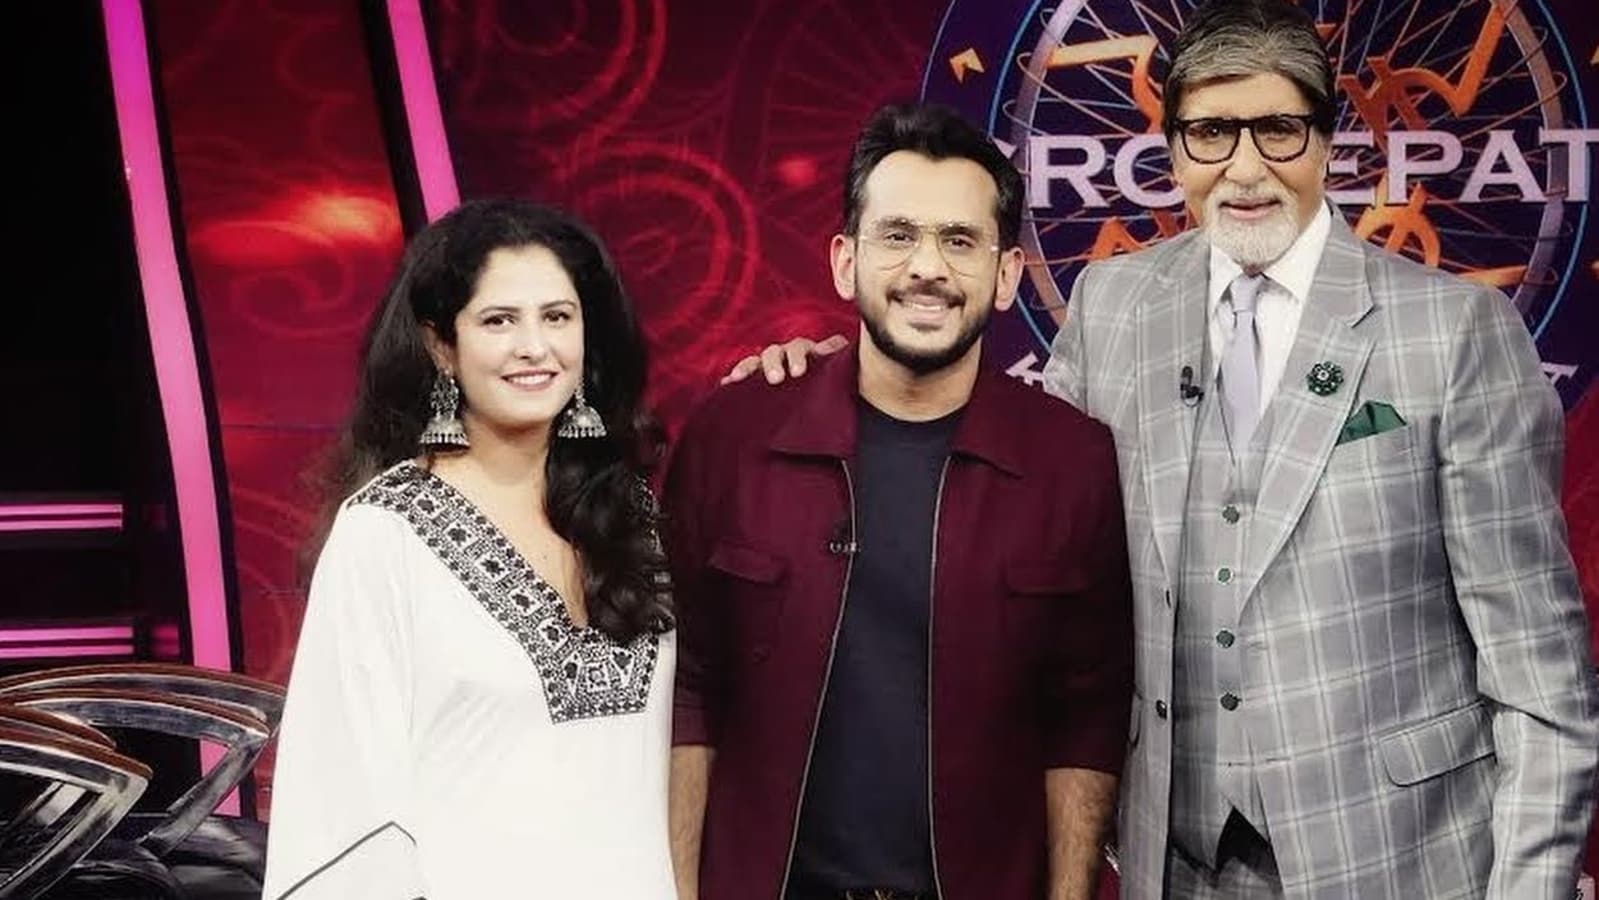 Amitabh Bachchan in splits as Shark Tank’s Aman Gupta says what his wife did when he got ‘female attention’ on Instagram